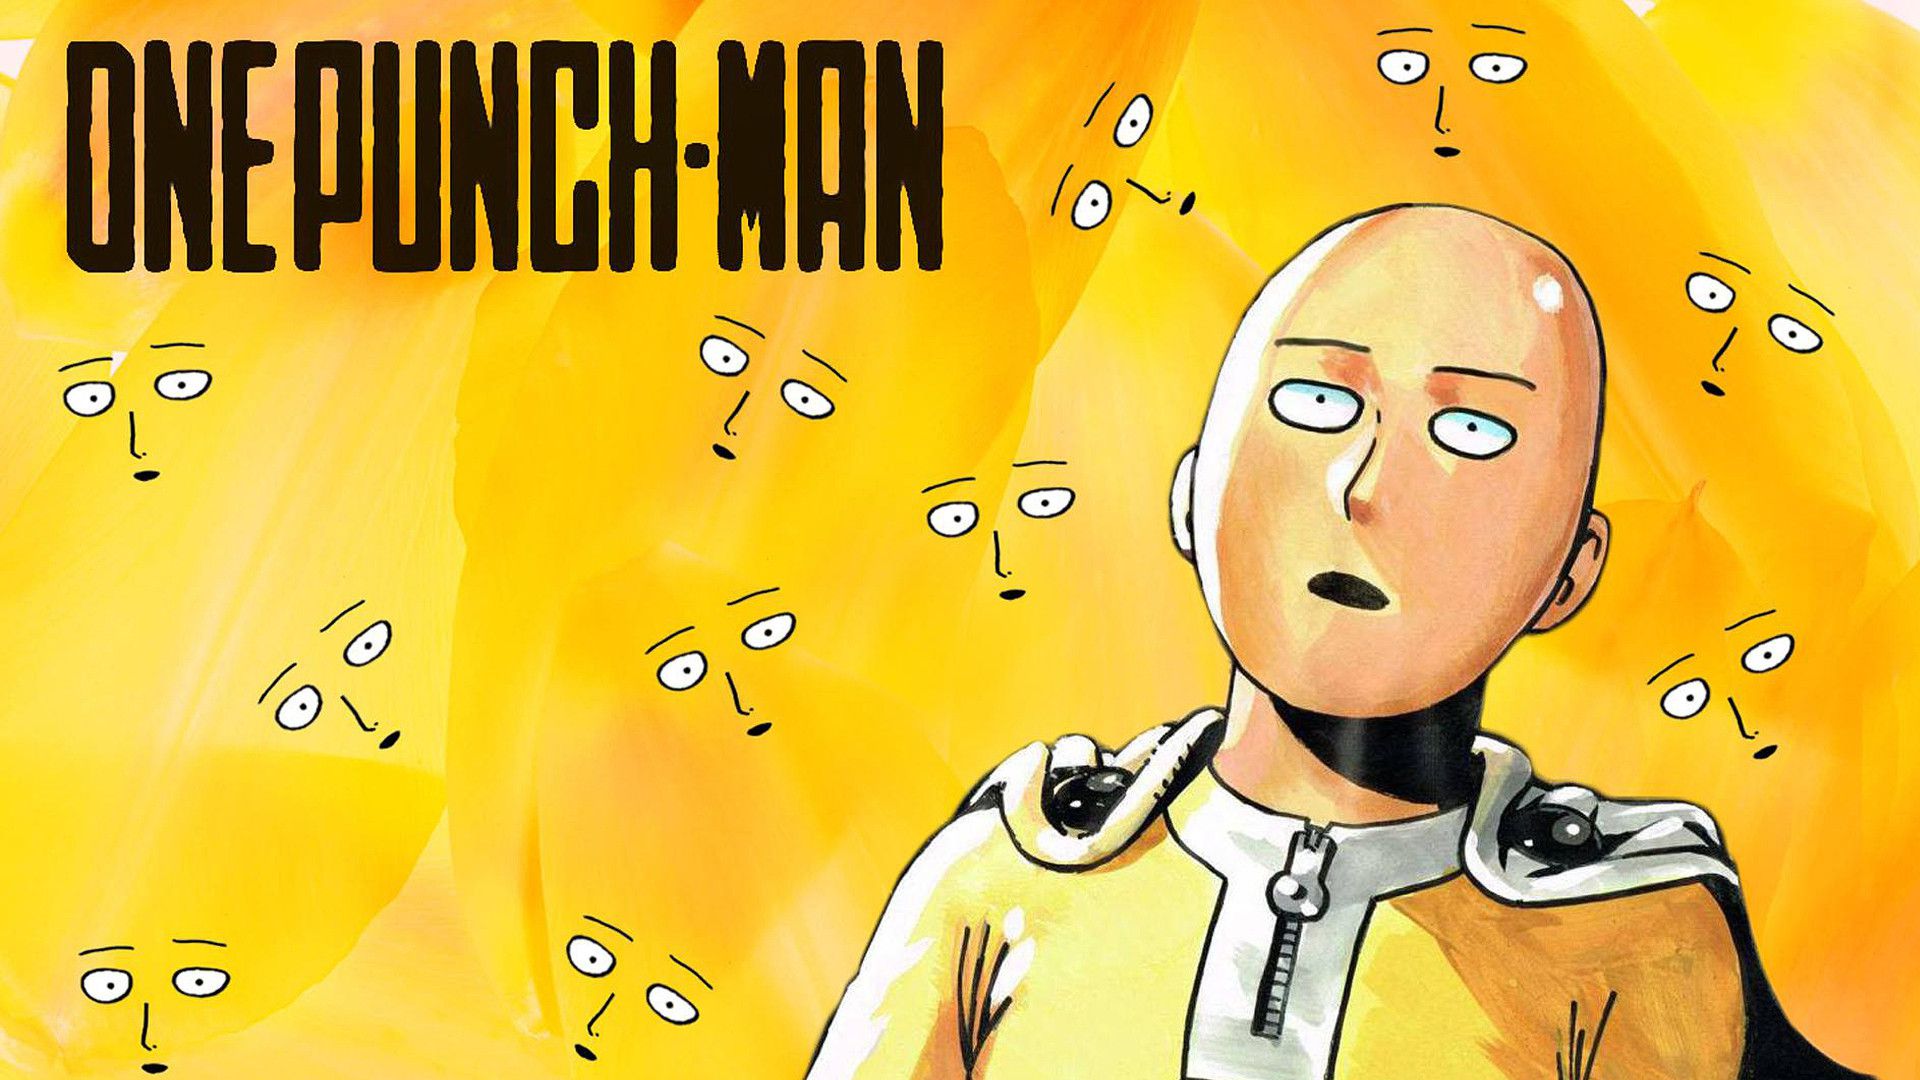 One-punch man hd wallpapers, hd images, backgrounds